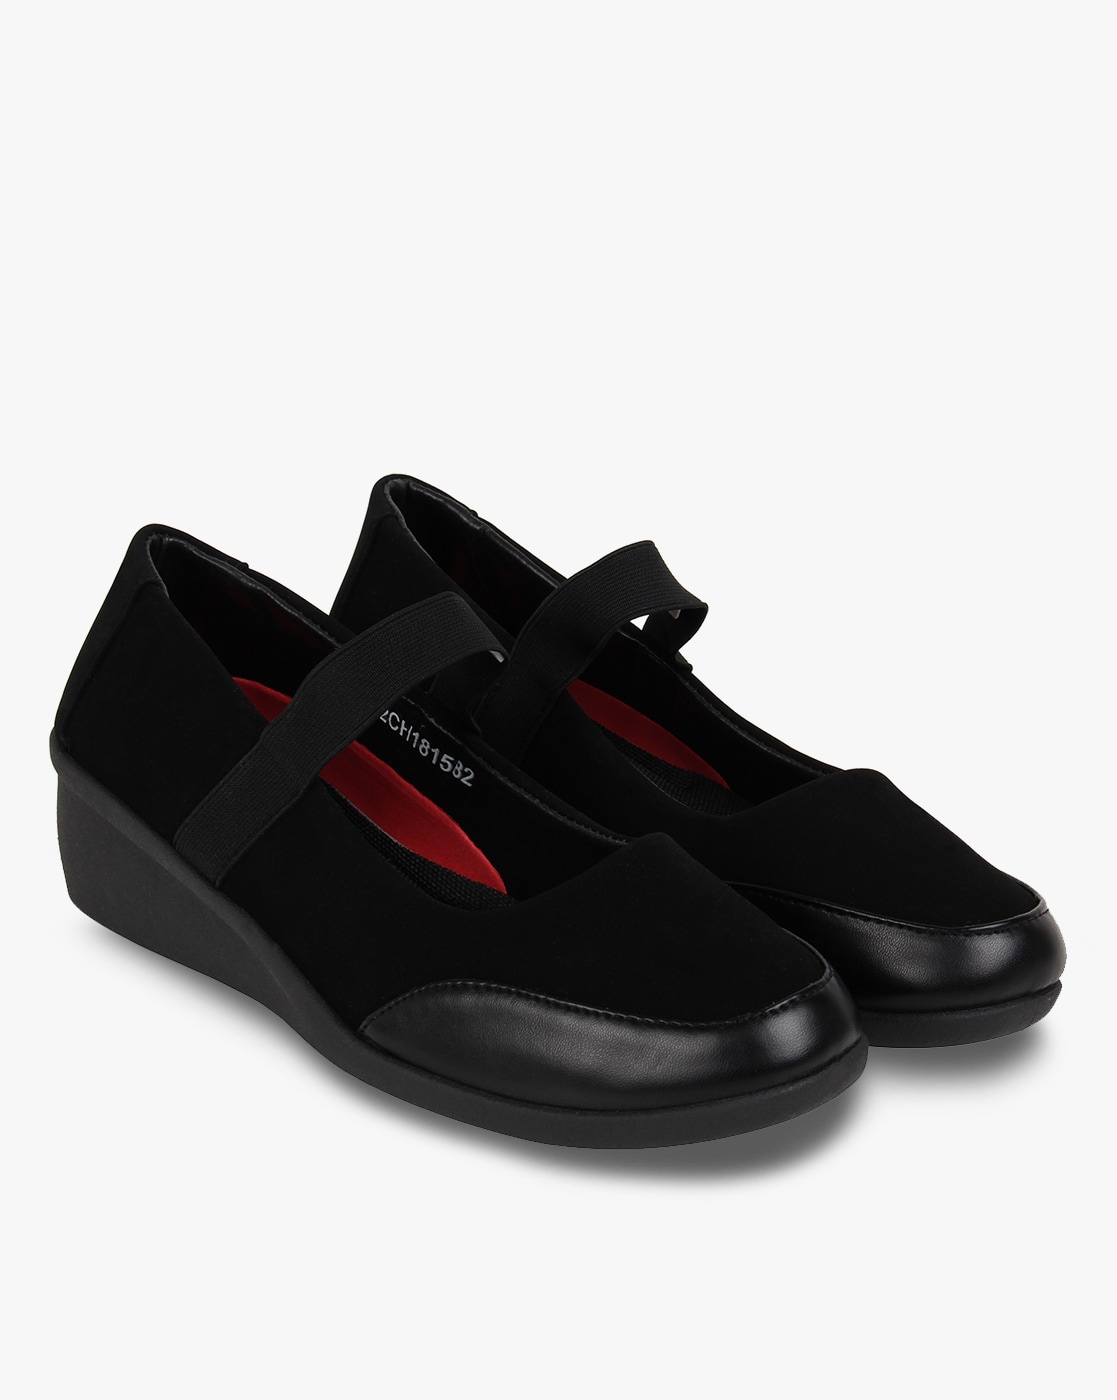 Buy Black Heeled Shoes For Women By Catwalk Online Ajio Com